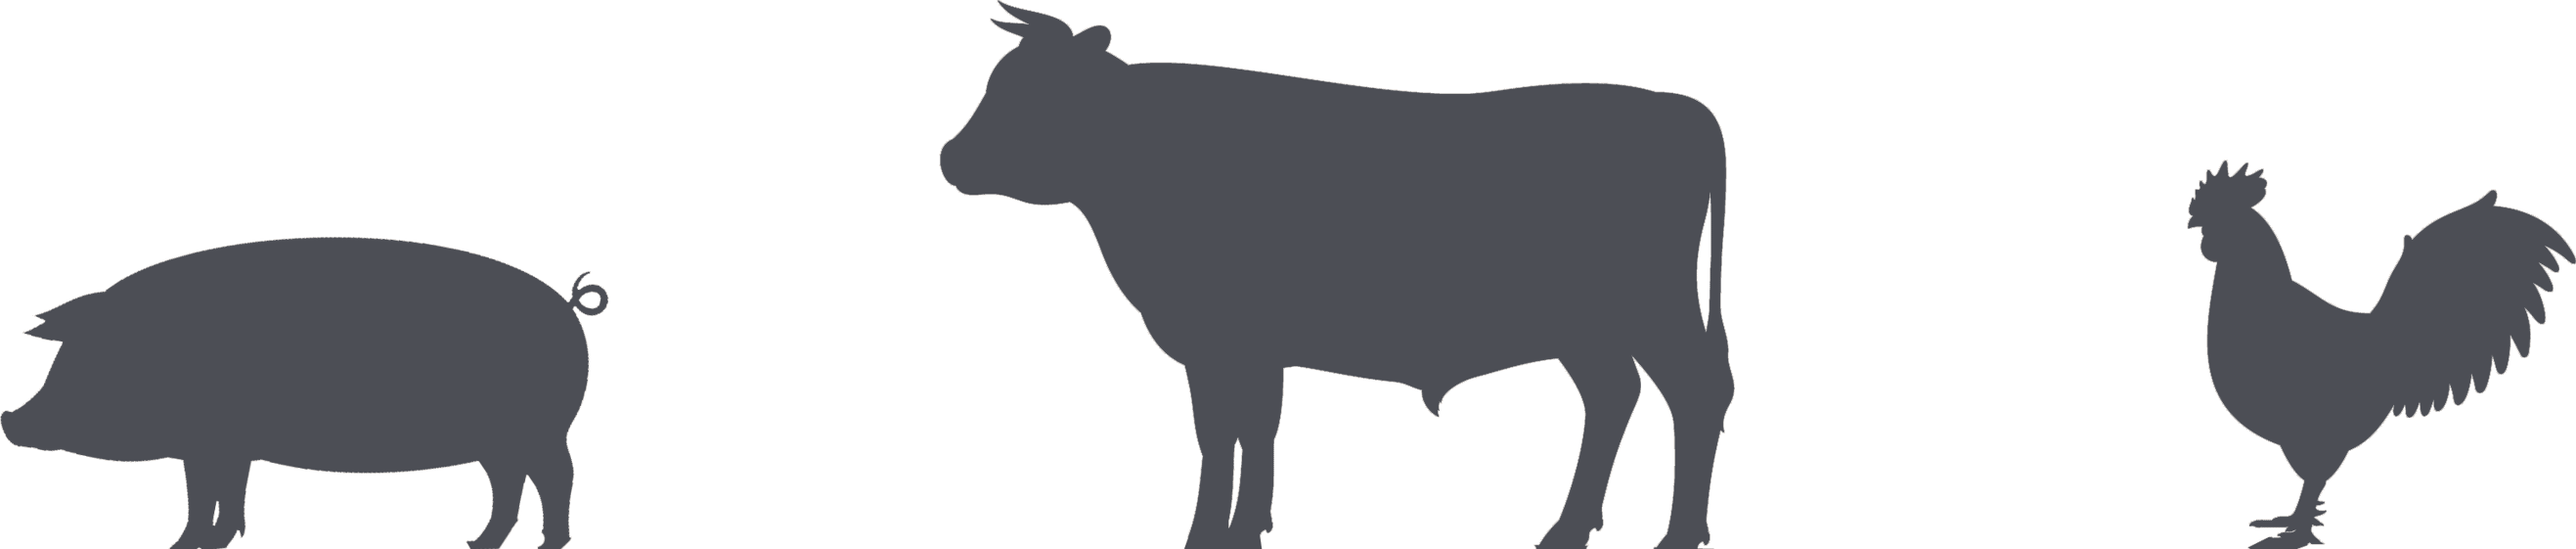 Eat menu sections omc. Cows clipart bbq